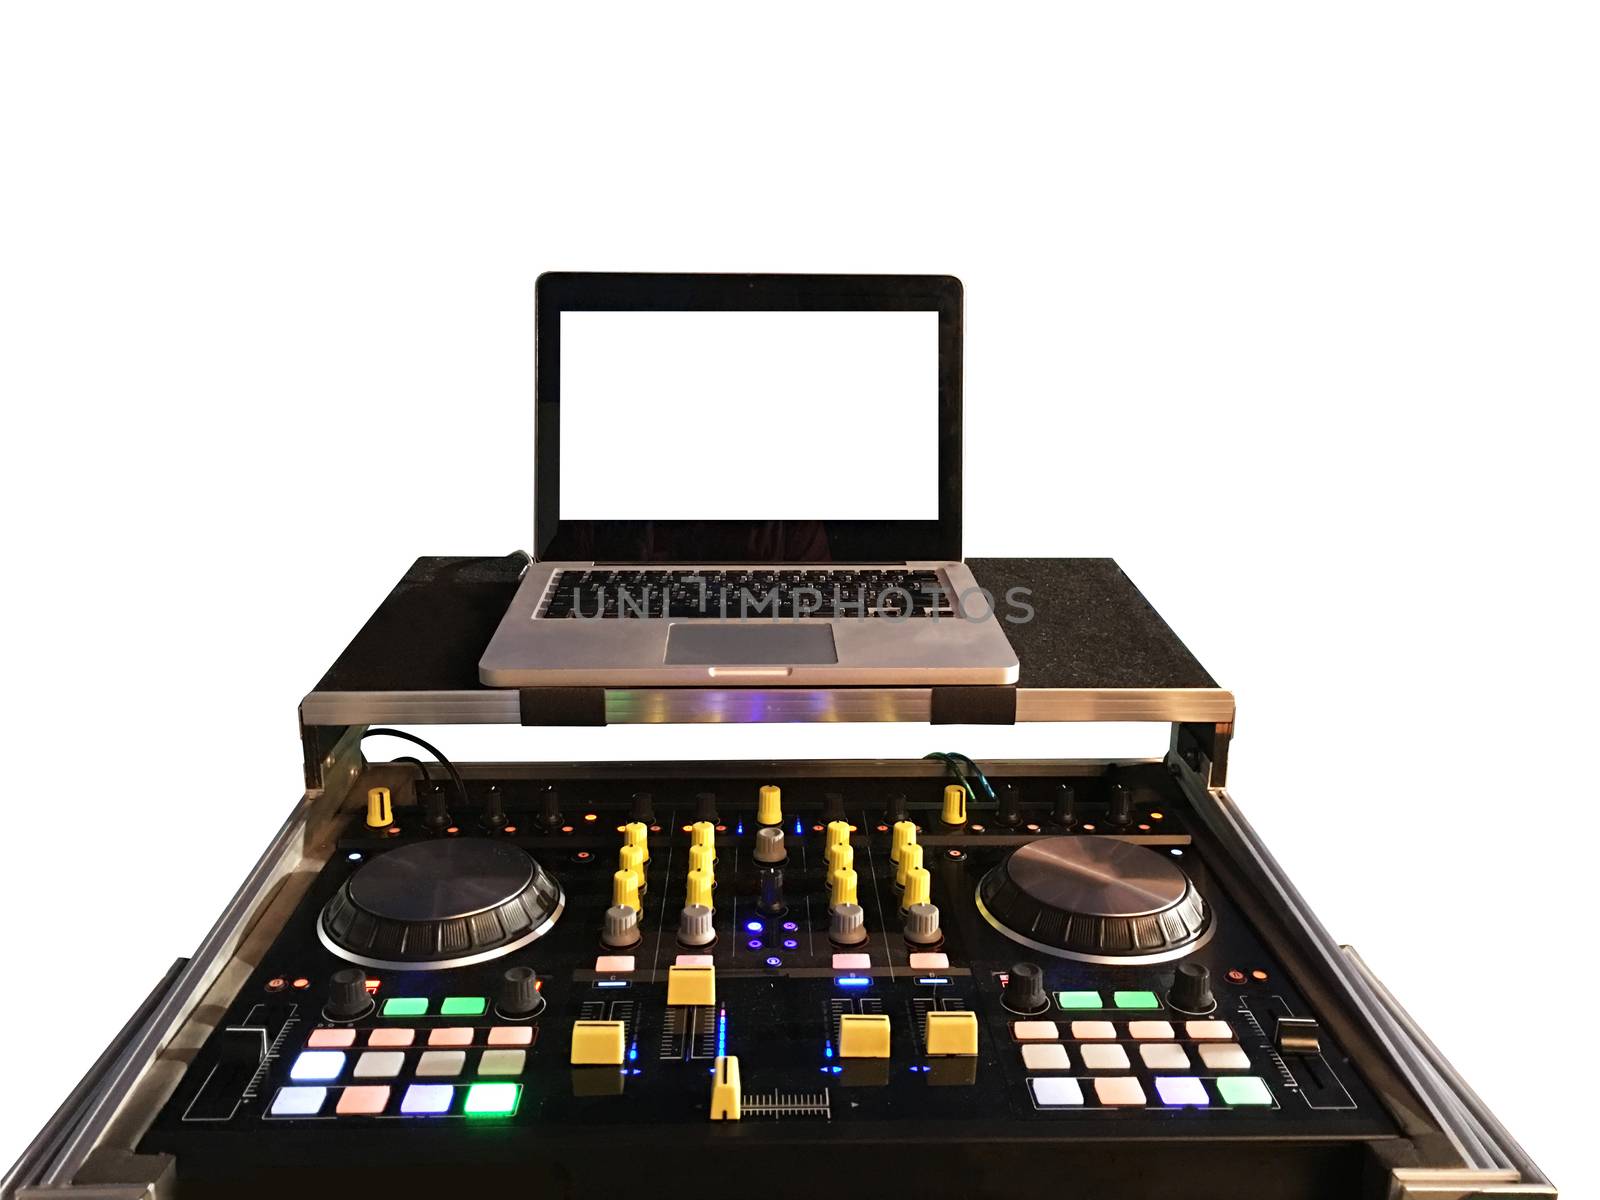 Dj machine on a mixer and turntables with the vinyl on white background
